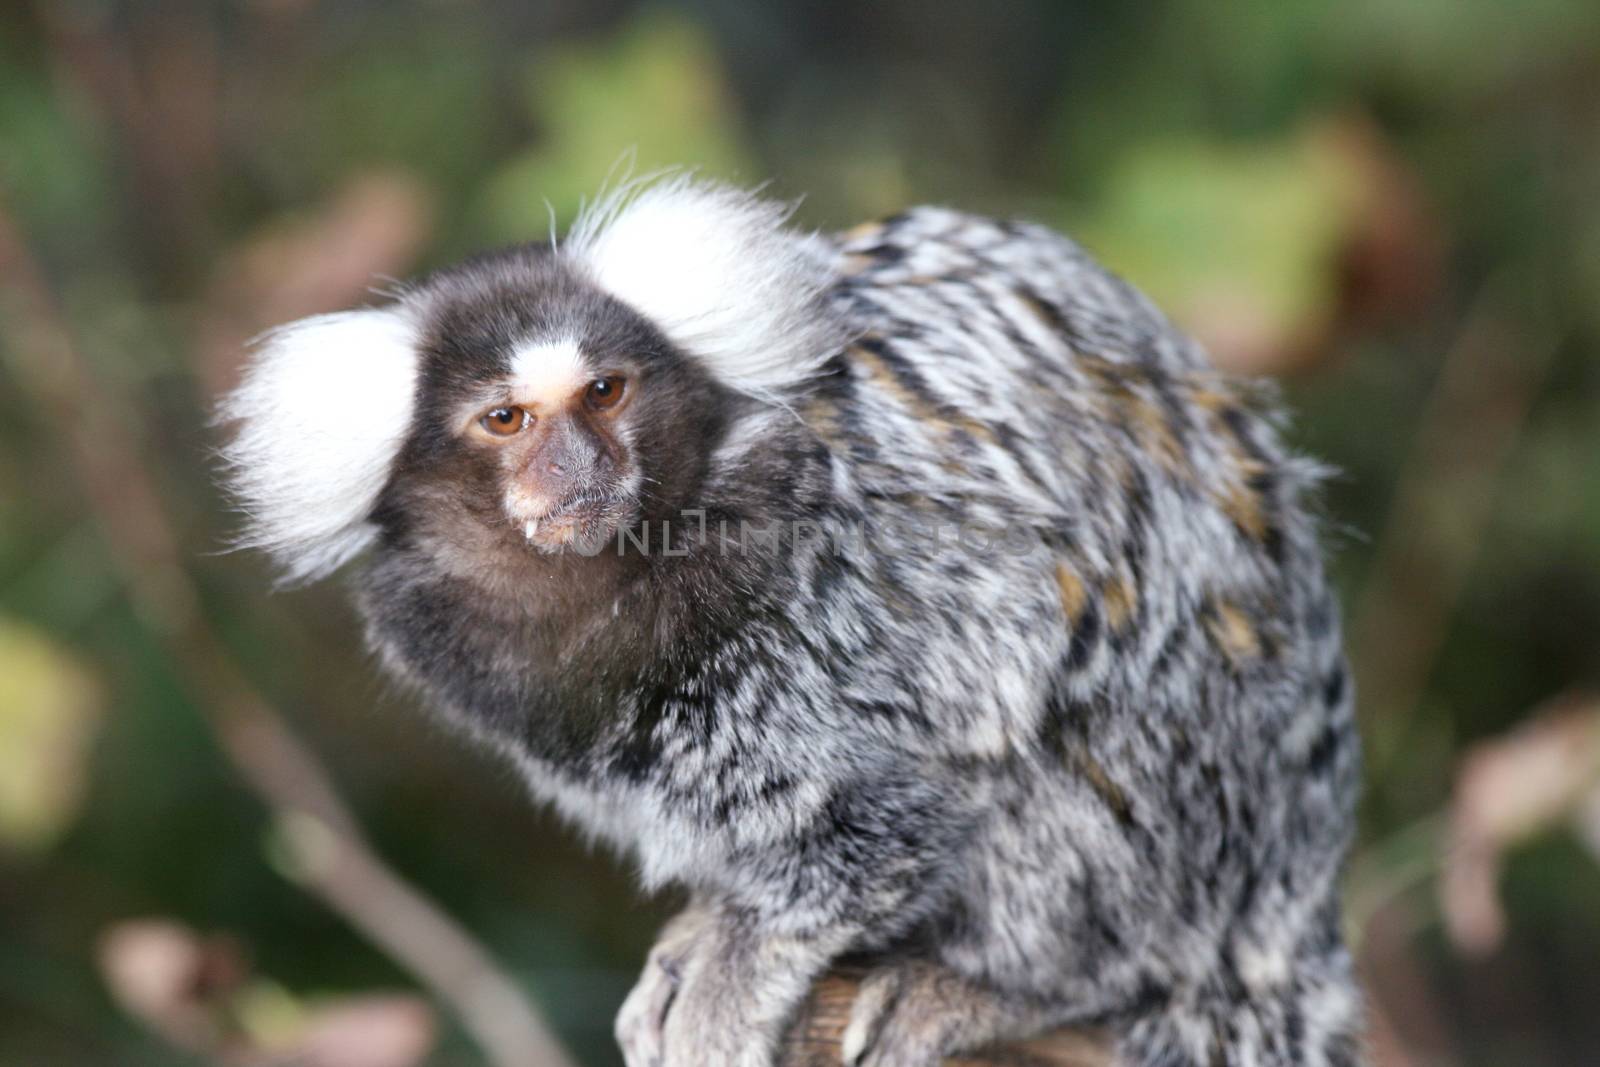 Common Marmoset (Callithrix jacchus), a small primate from Brazil